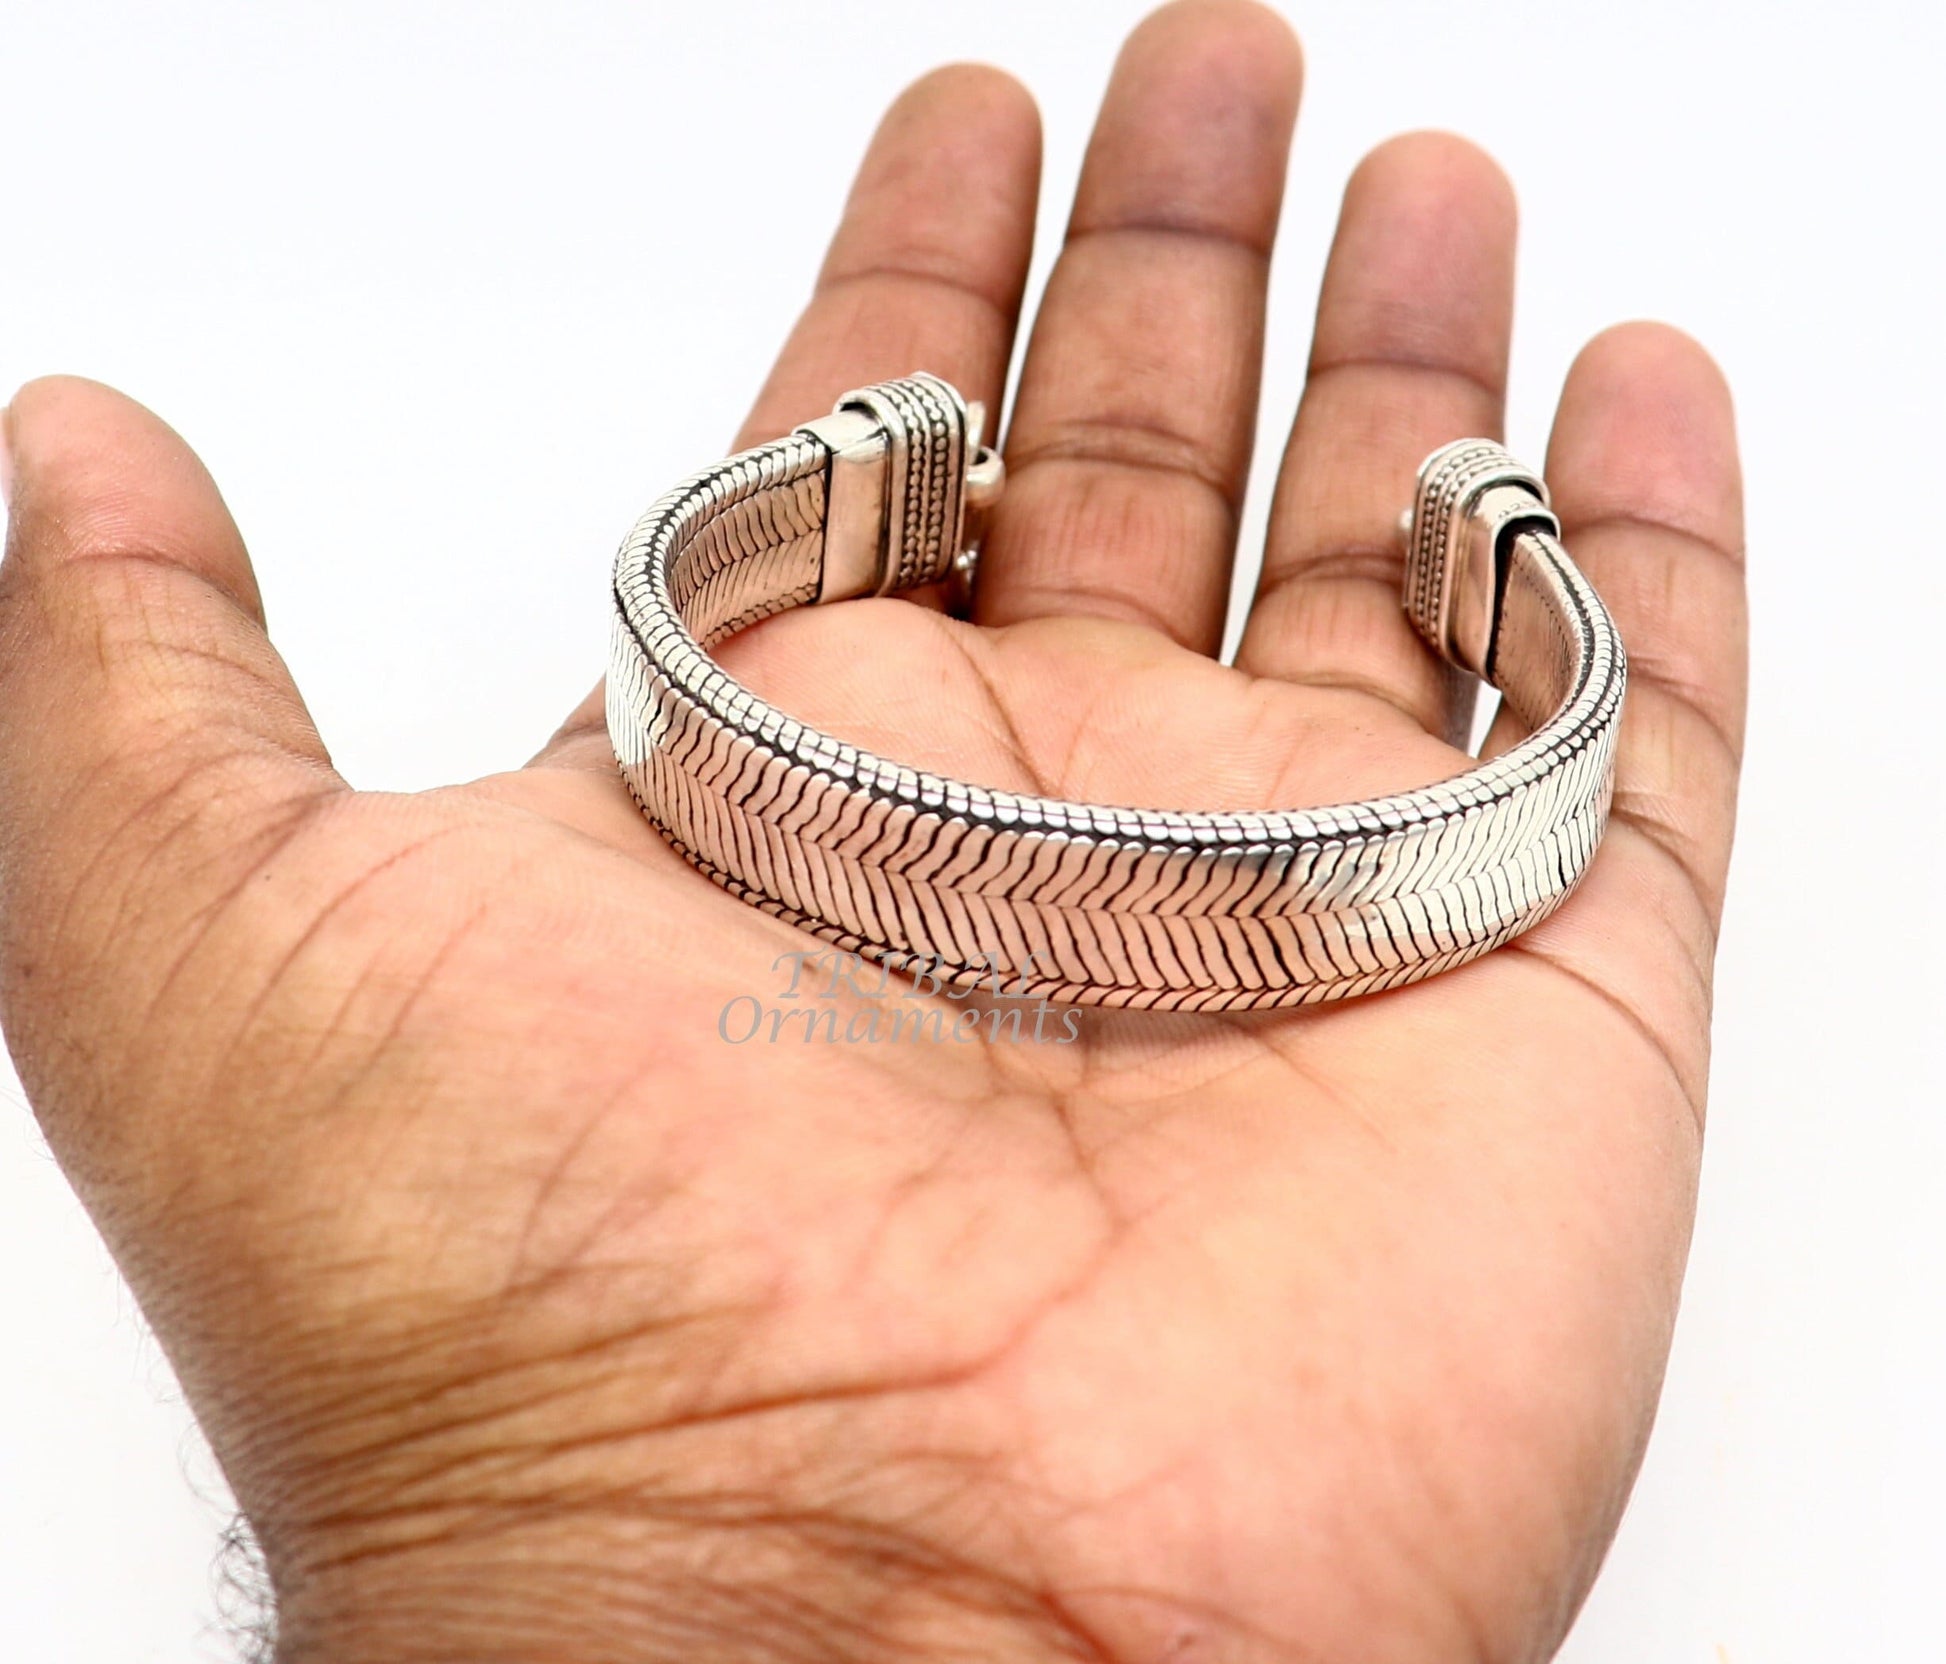 925 sterling silver handmade gorgeous vintage design solid wheat chain flexible bracelet belt unisex jewelry from Rajasthan India sbr409 - TRIBAL ORNAMENTS